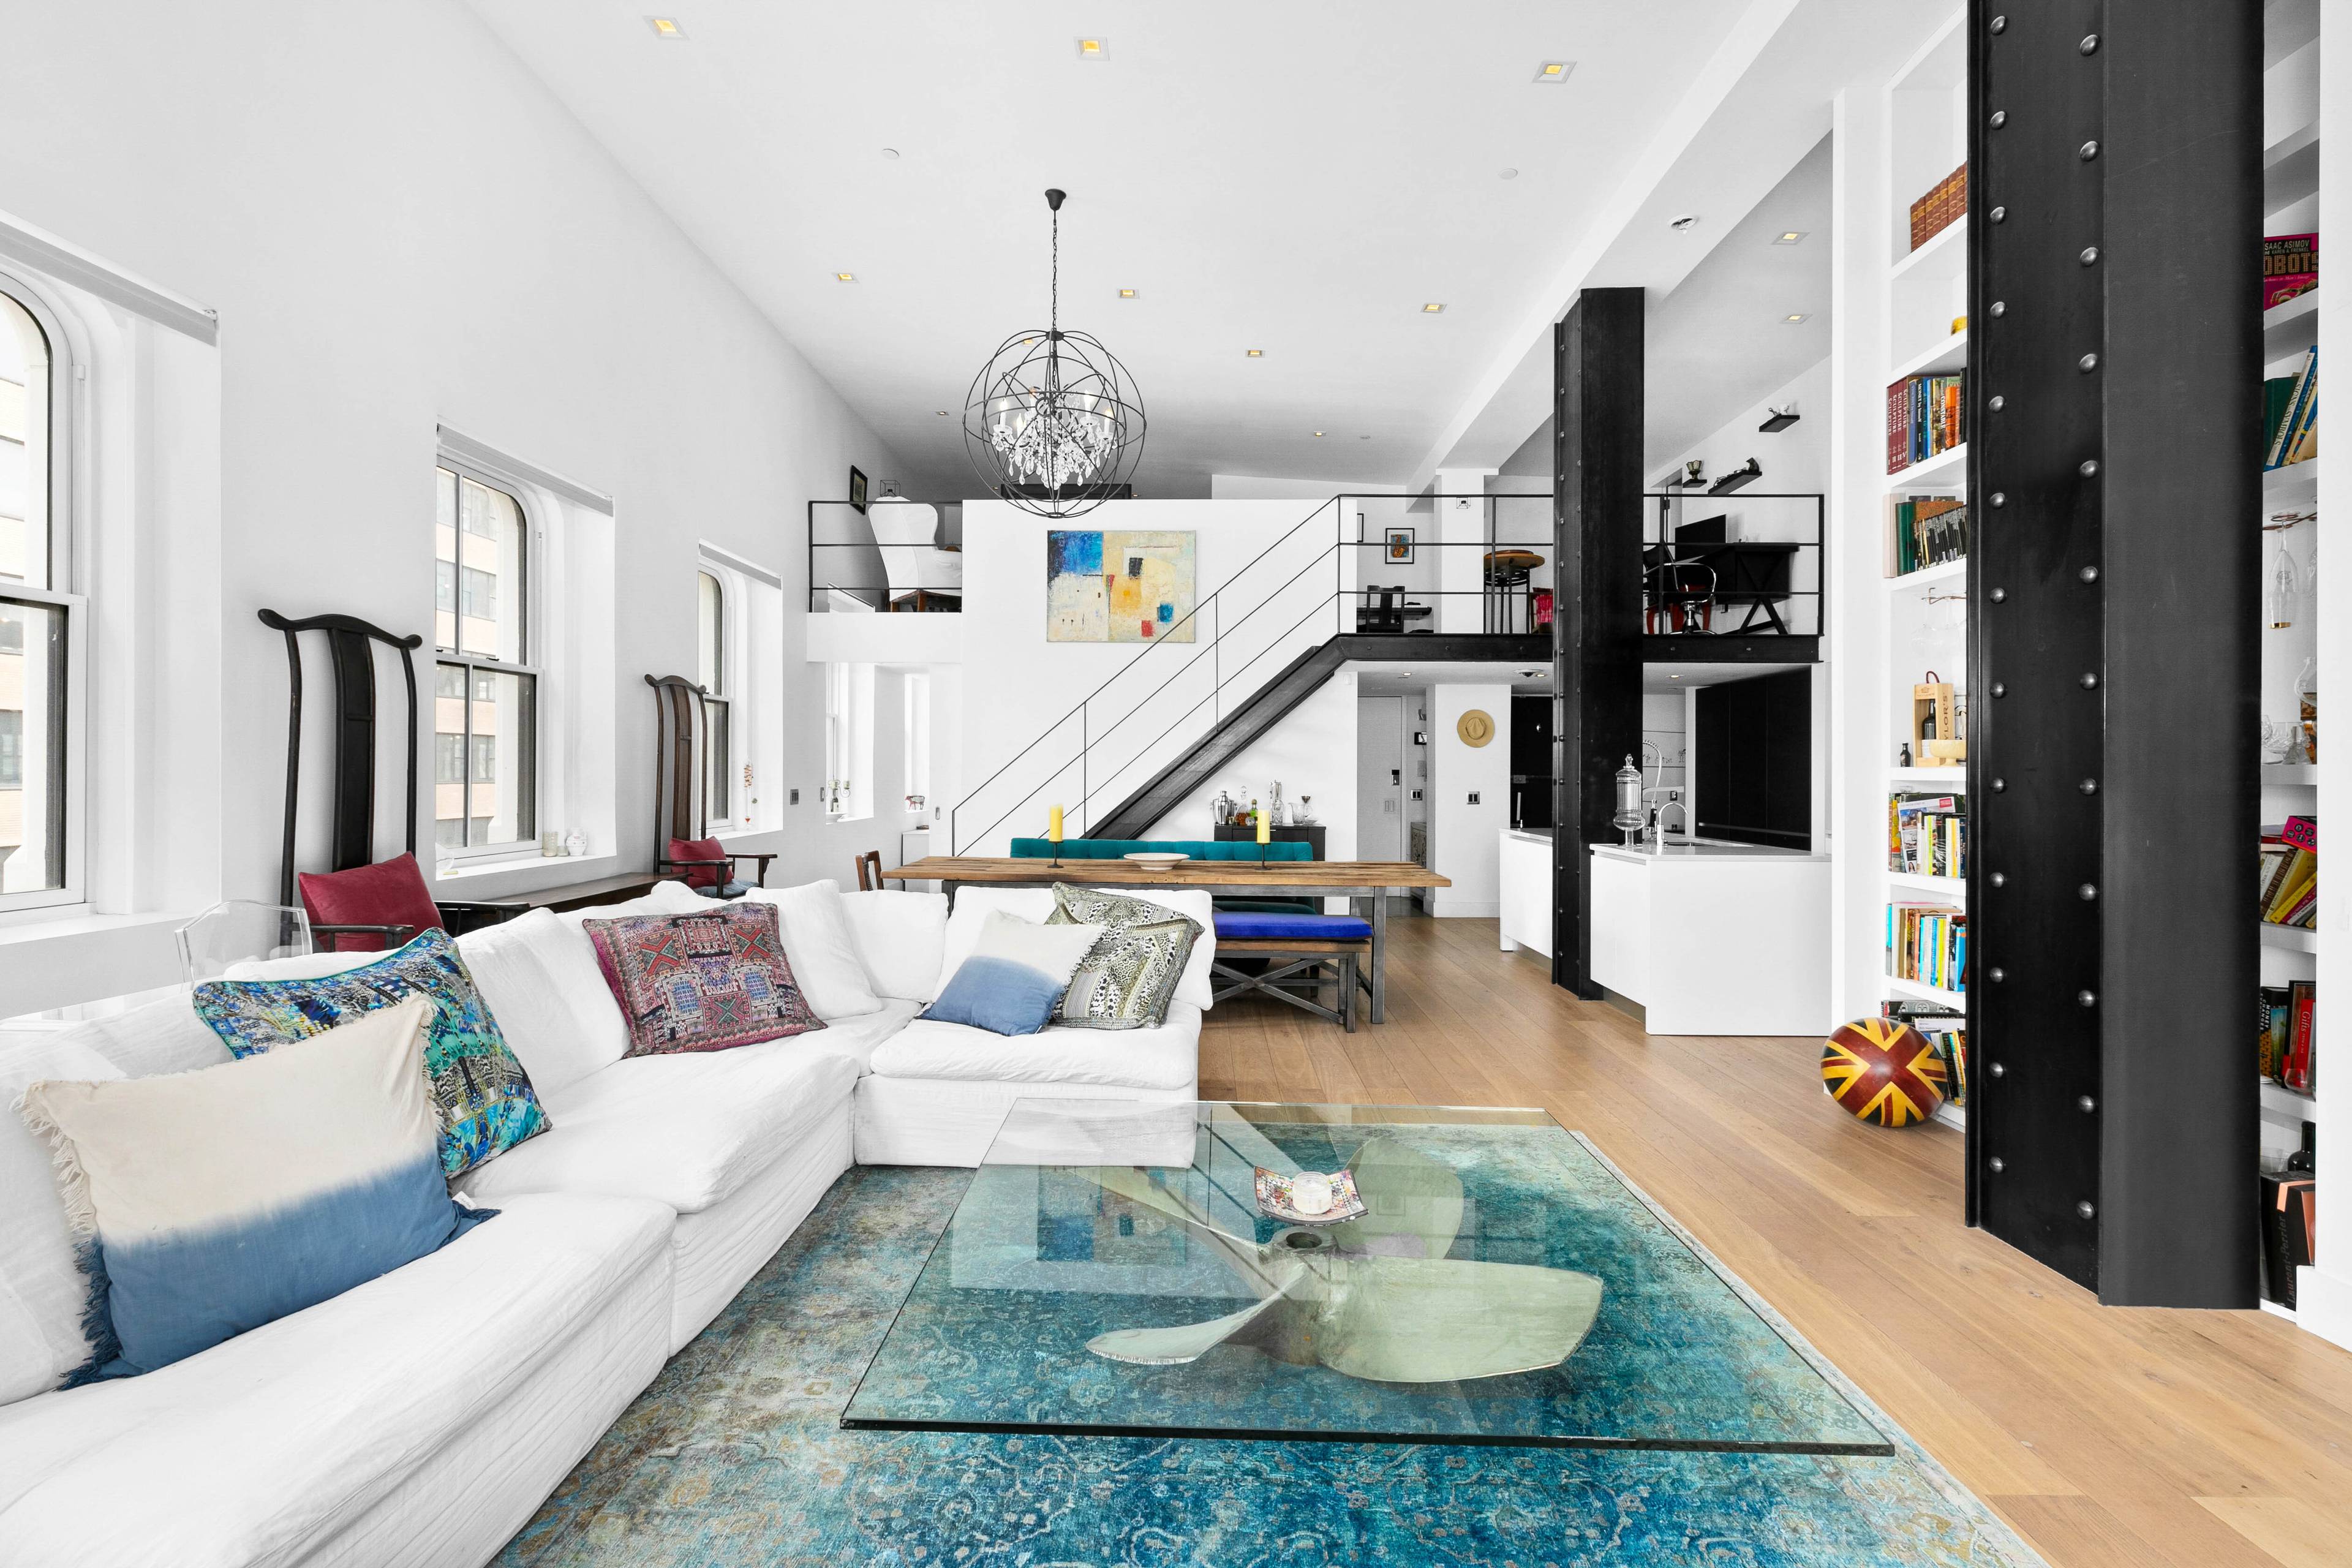 Penthouse perfection in a boutique pre war Tribeca Condominium of only 4 residences.